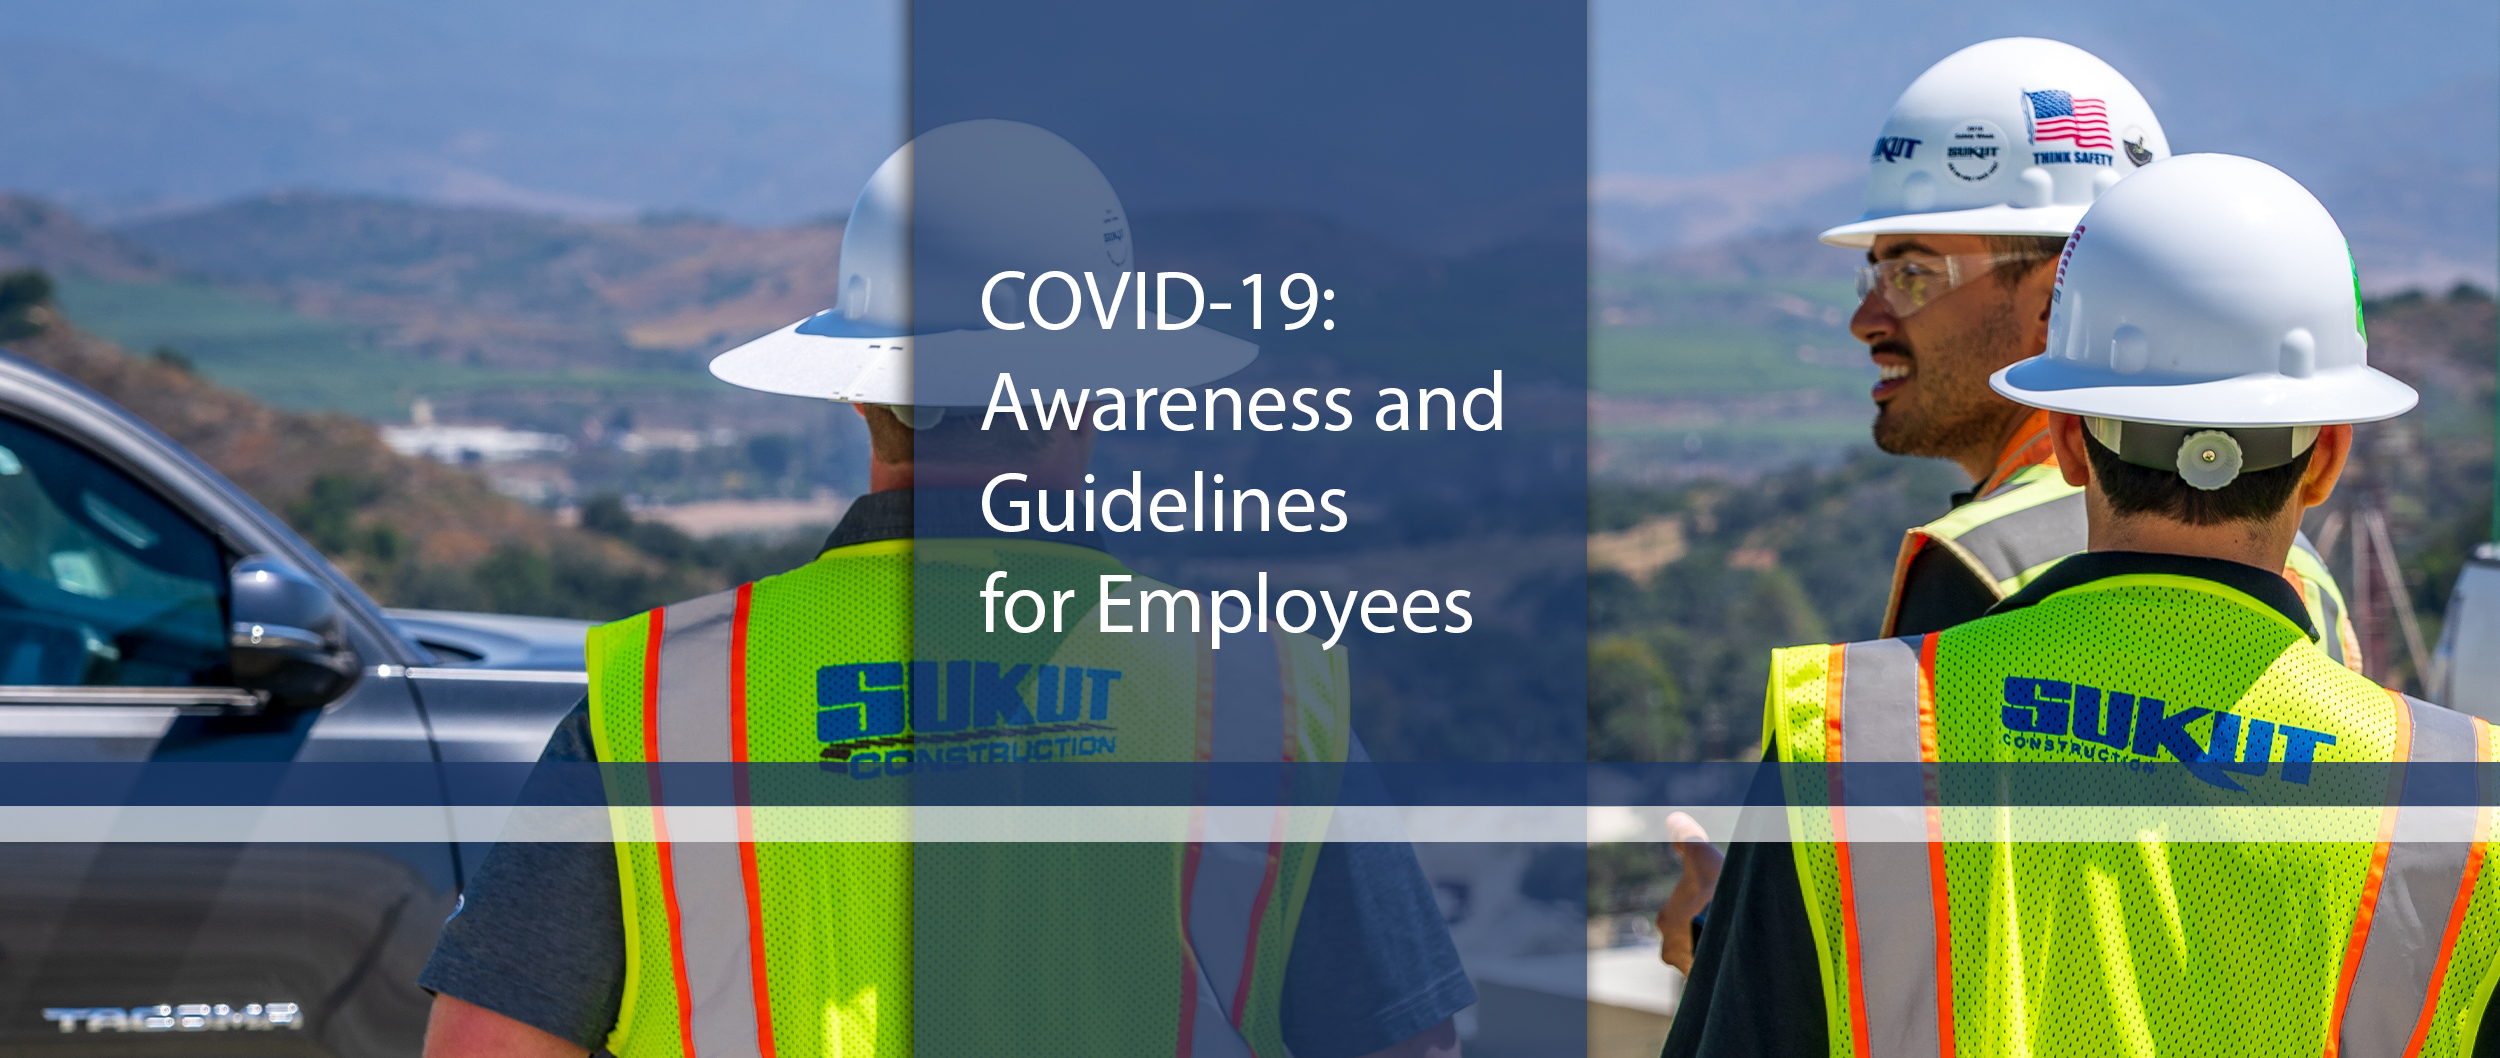 Protected: COVID-19: Awareness and Guidelines for Employees